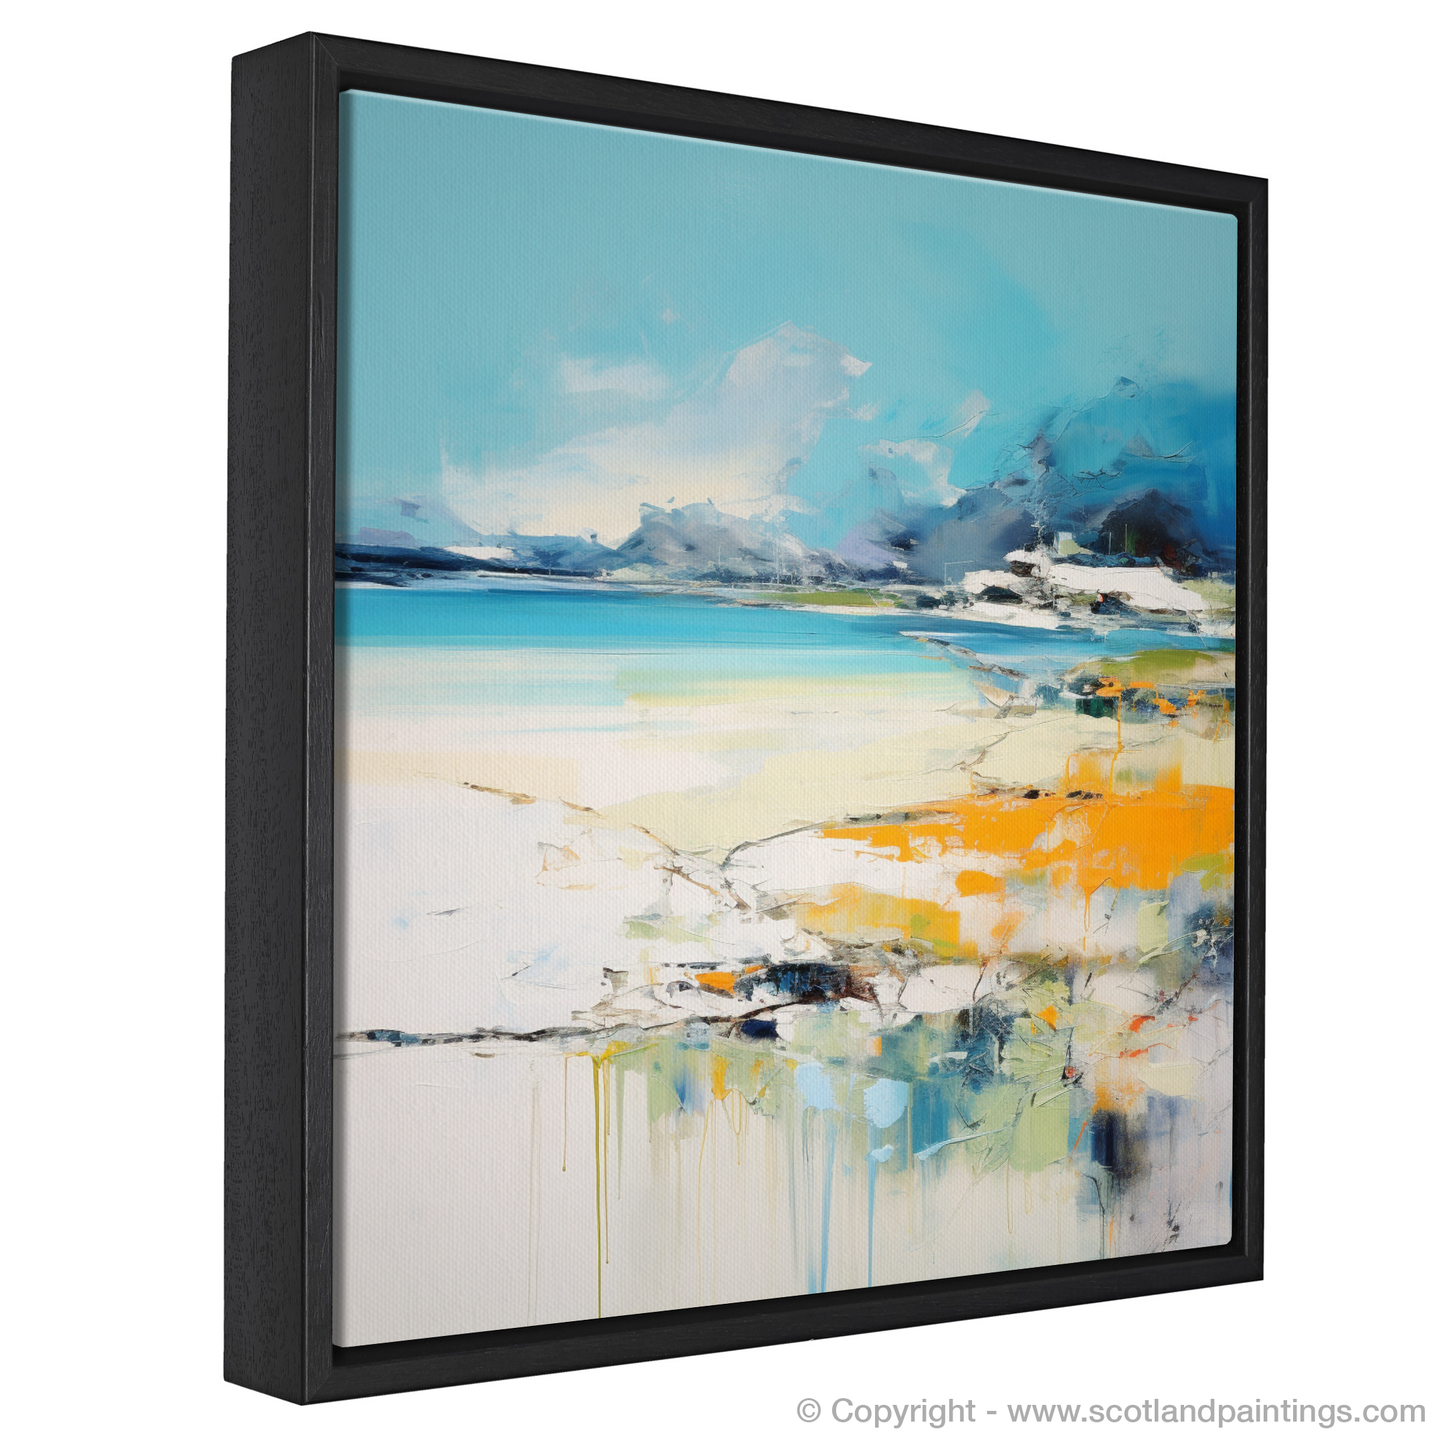 Painting and Art Print of Silver Sands of Morar in summer entitled "Summer's Embrace: Abstract Ode to Silver Sands of Morar".